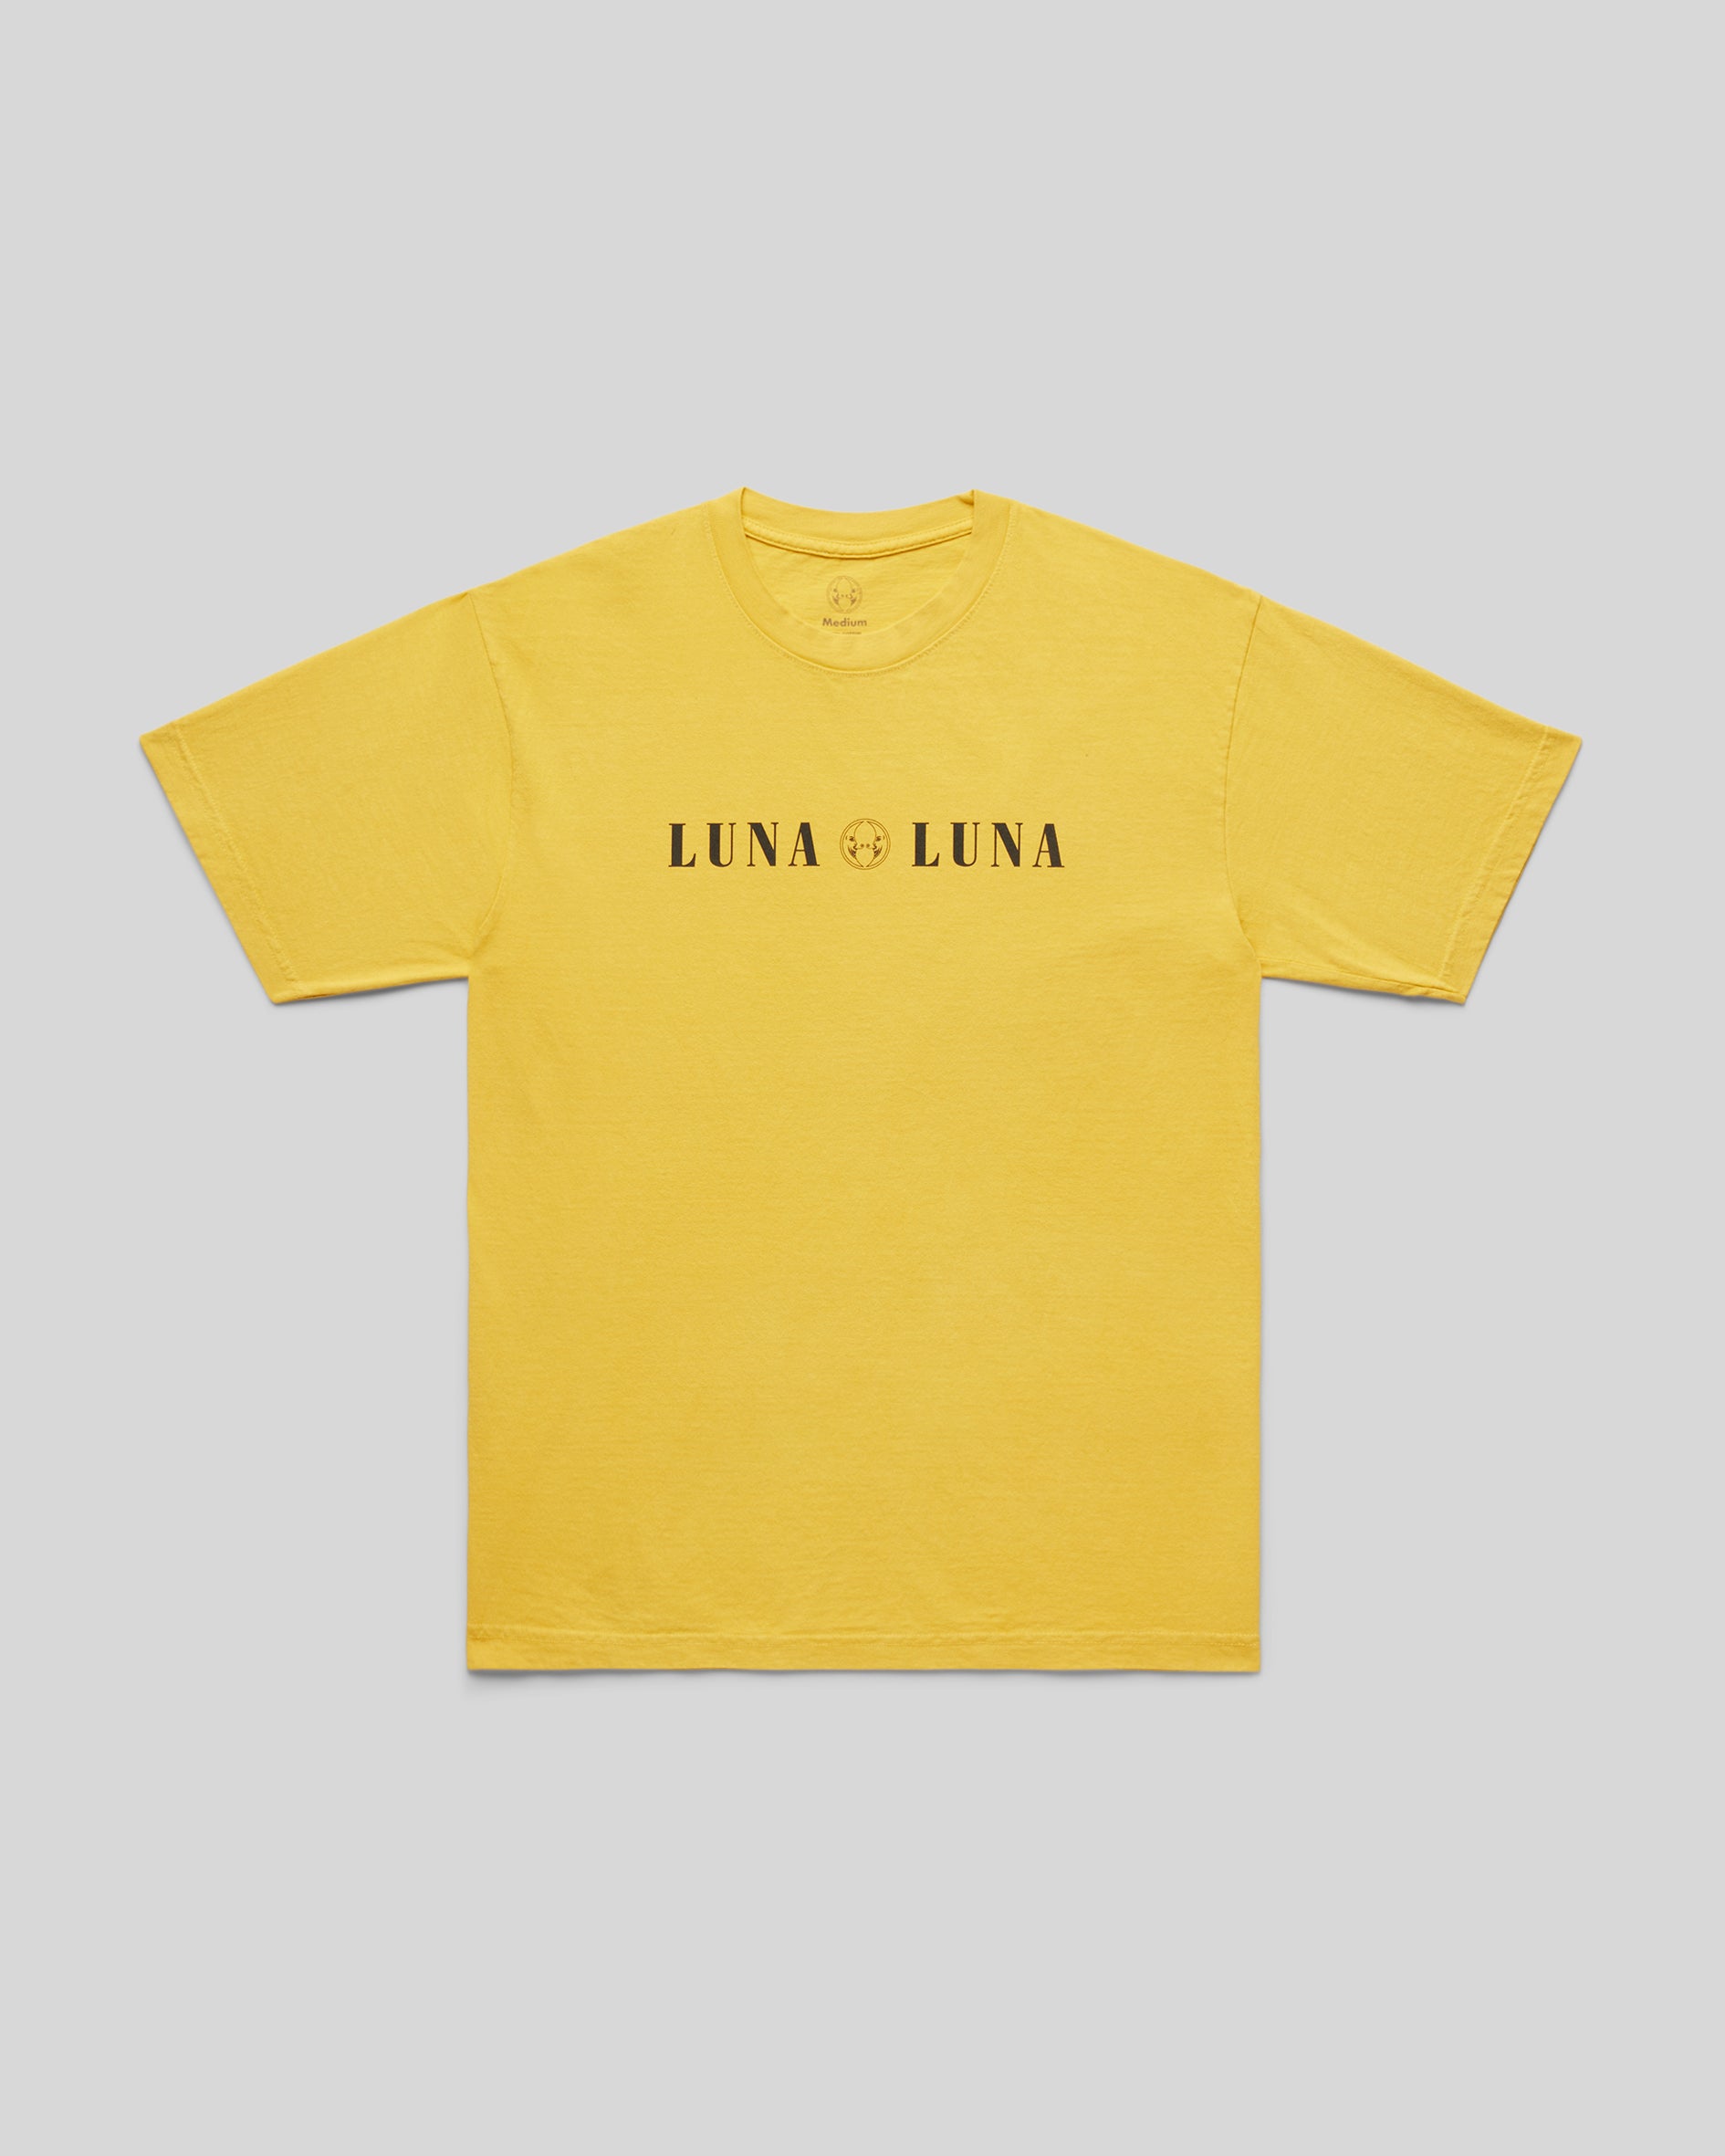 1987 Luna Luna T-Shirt in Yellow. Yellow t-shirt with black text at chest that reads "LUNA LUNA"